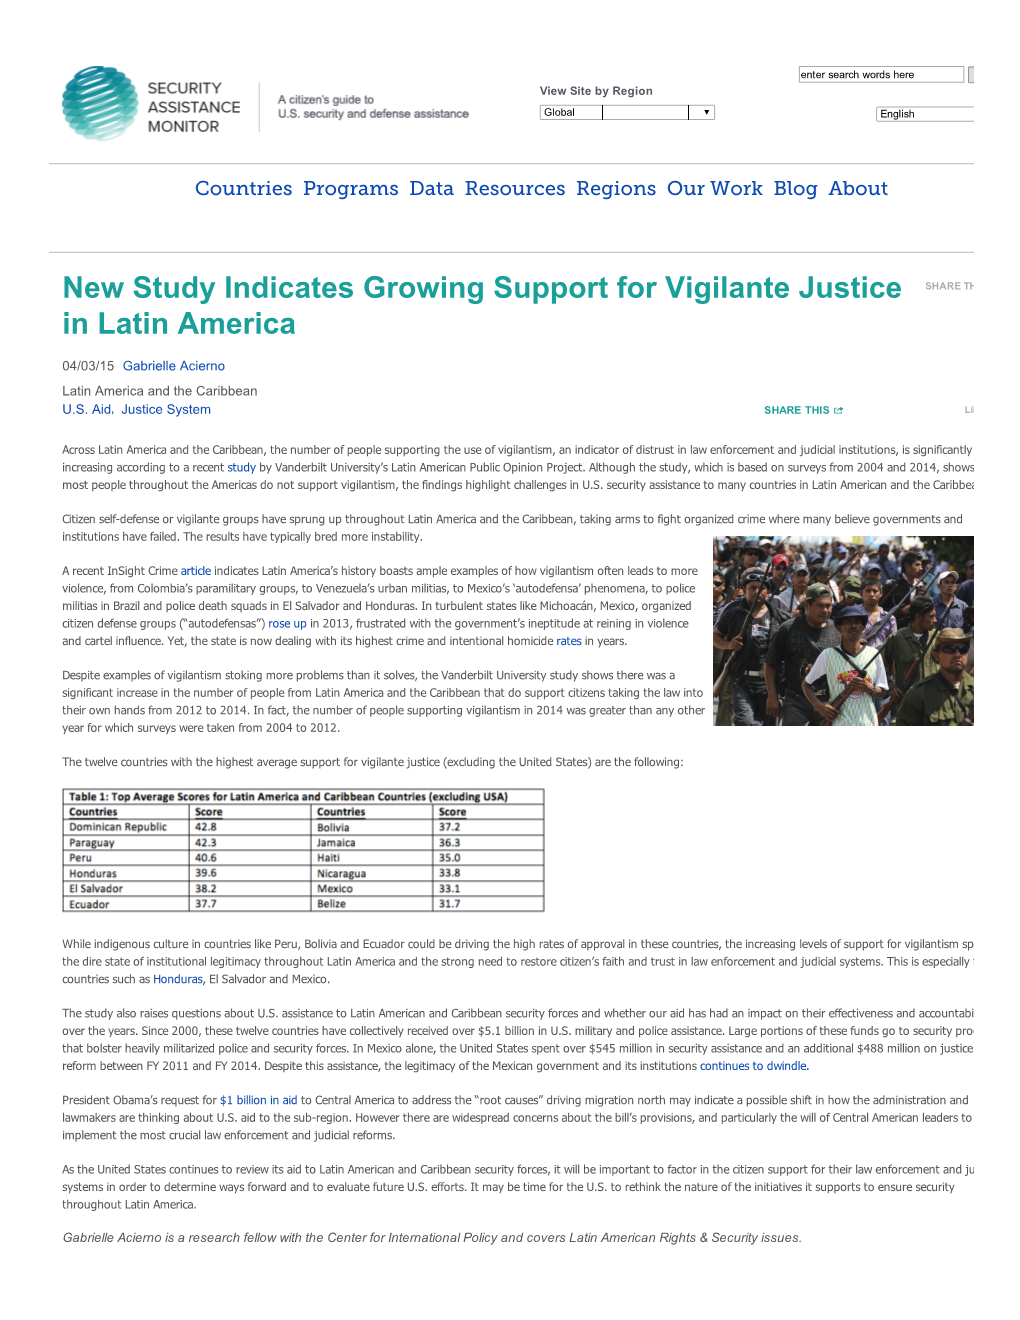 New Study Indicates Growing Support for Vigilante Justice in Latin America | Security Assistance Monitor